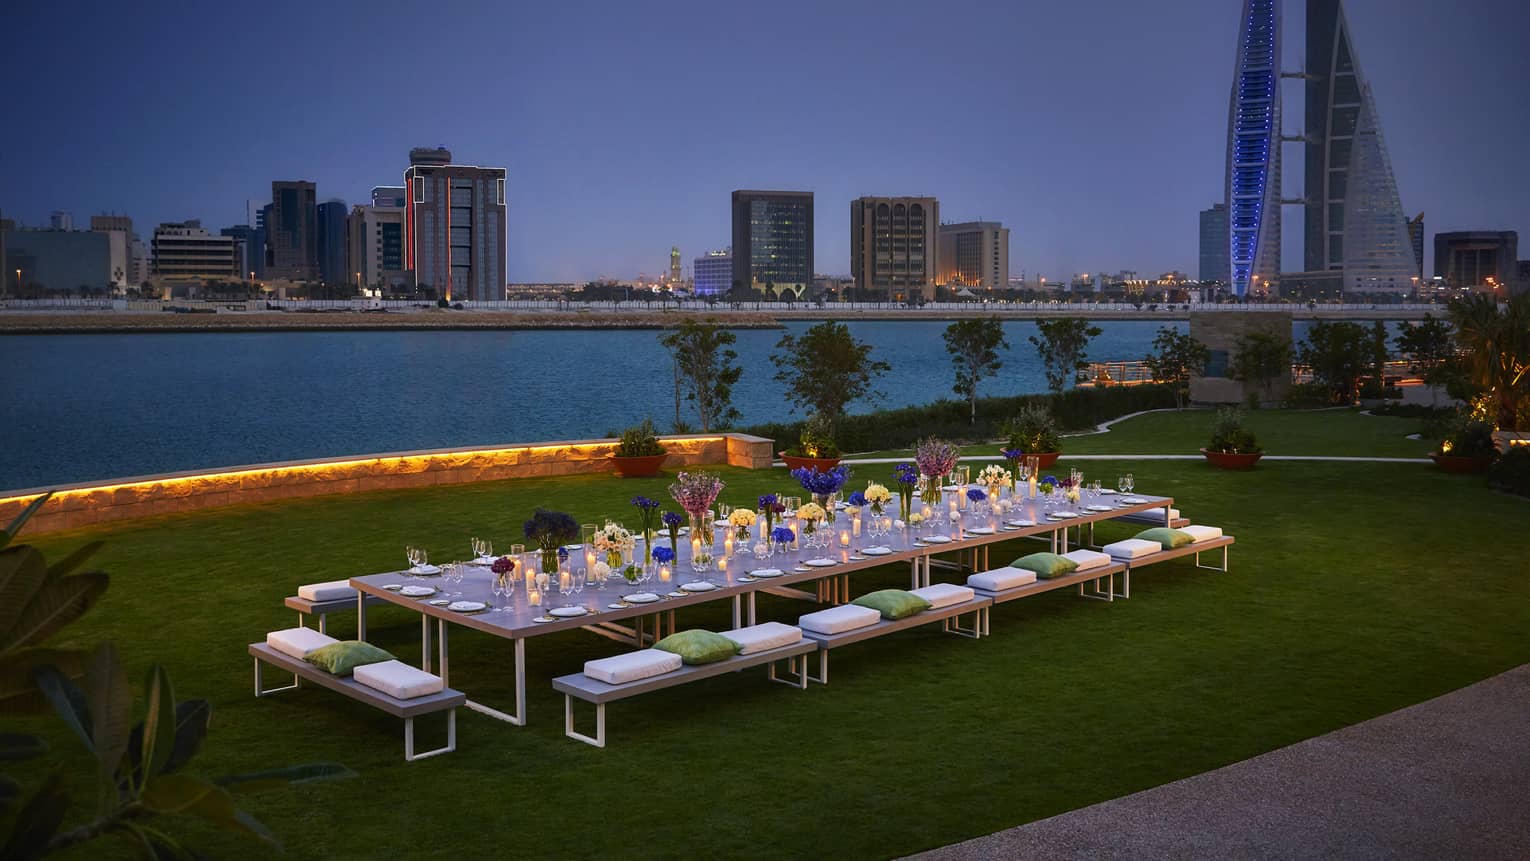 Long, candle-lit dining table on event lawn by water at night